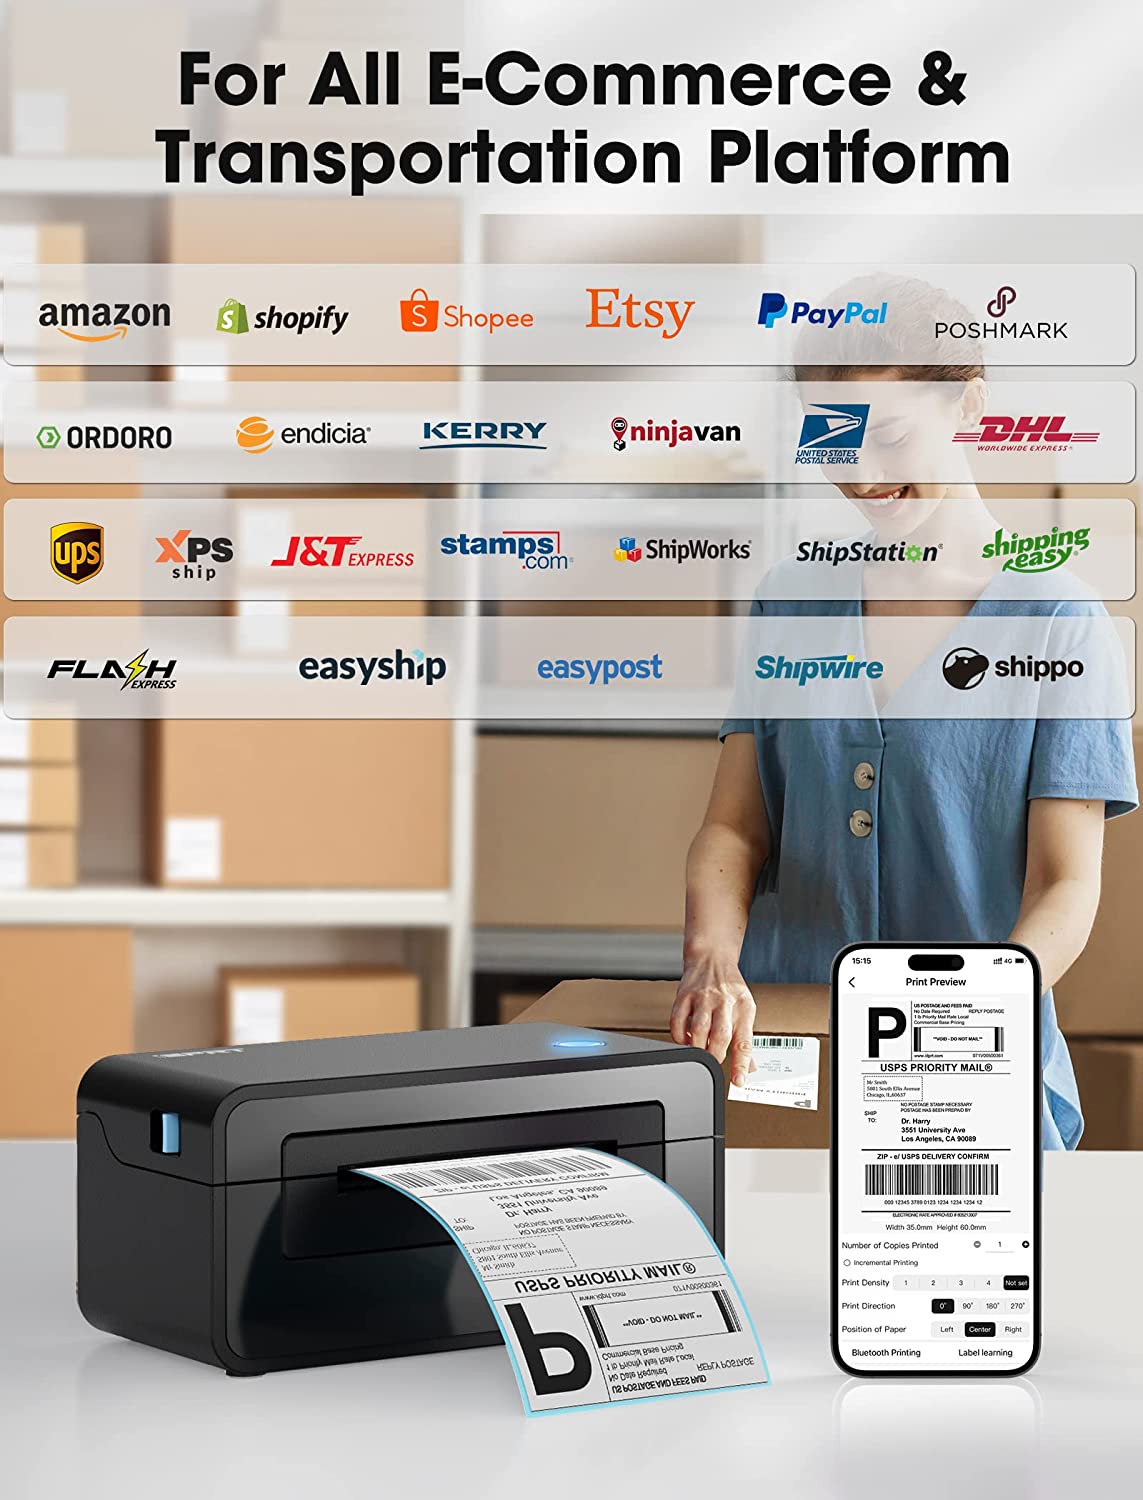 iDPRT A4 Thermal Printer, Inkless Printer, 300dpi Resolution 4ips Fast A4  Paper Printer with Auto Cutting, 100 Sheets Capacity, Compact Design,  Support WiFi App Wireless or USB Connection - Yahoo Shopping